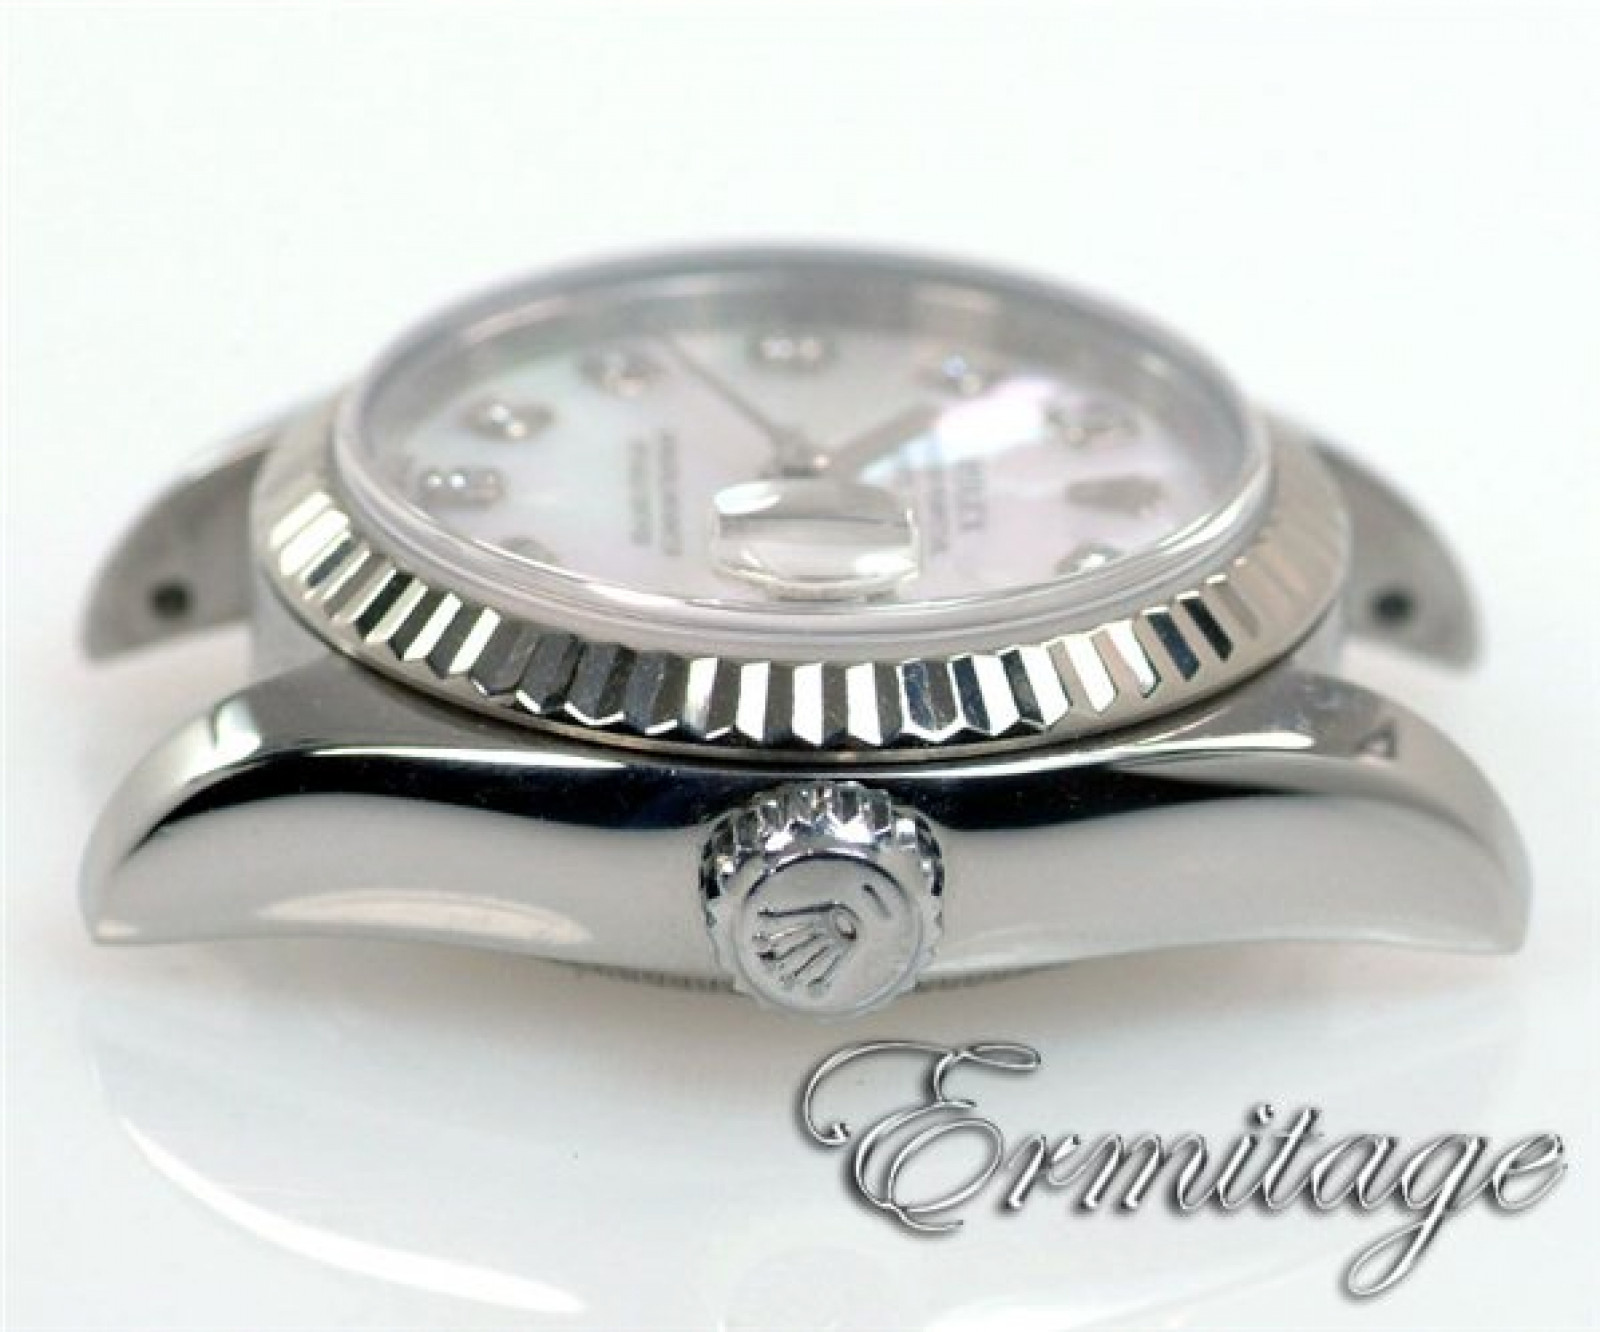 White Diamond Dial Rolex Datejust 179174 with White Gold